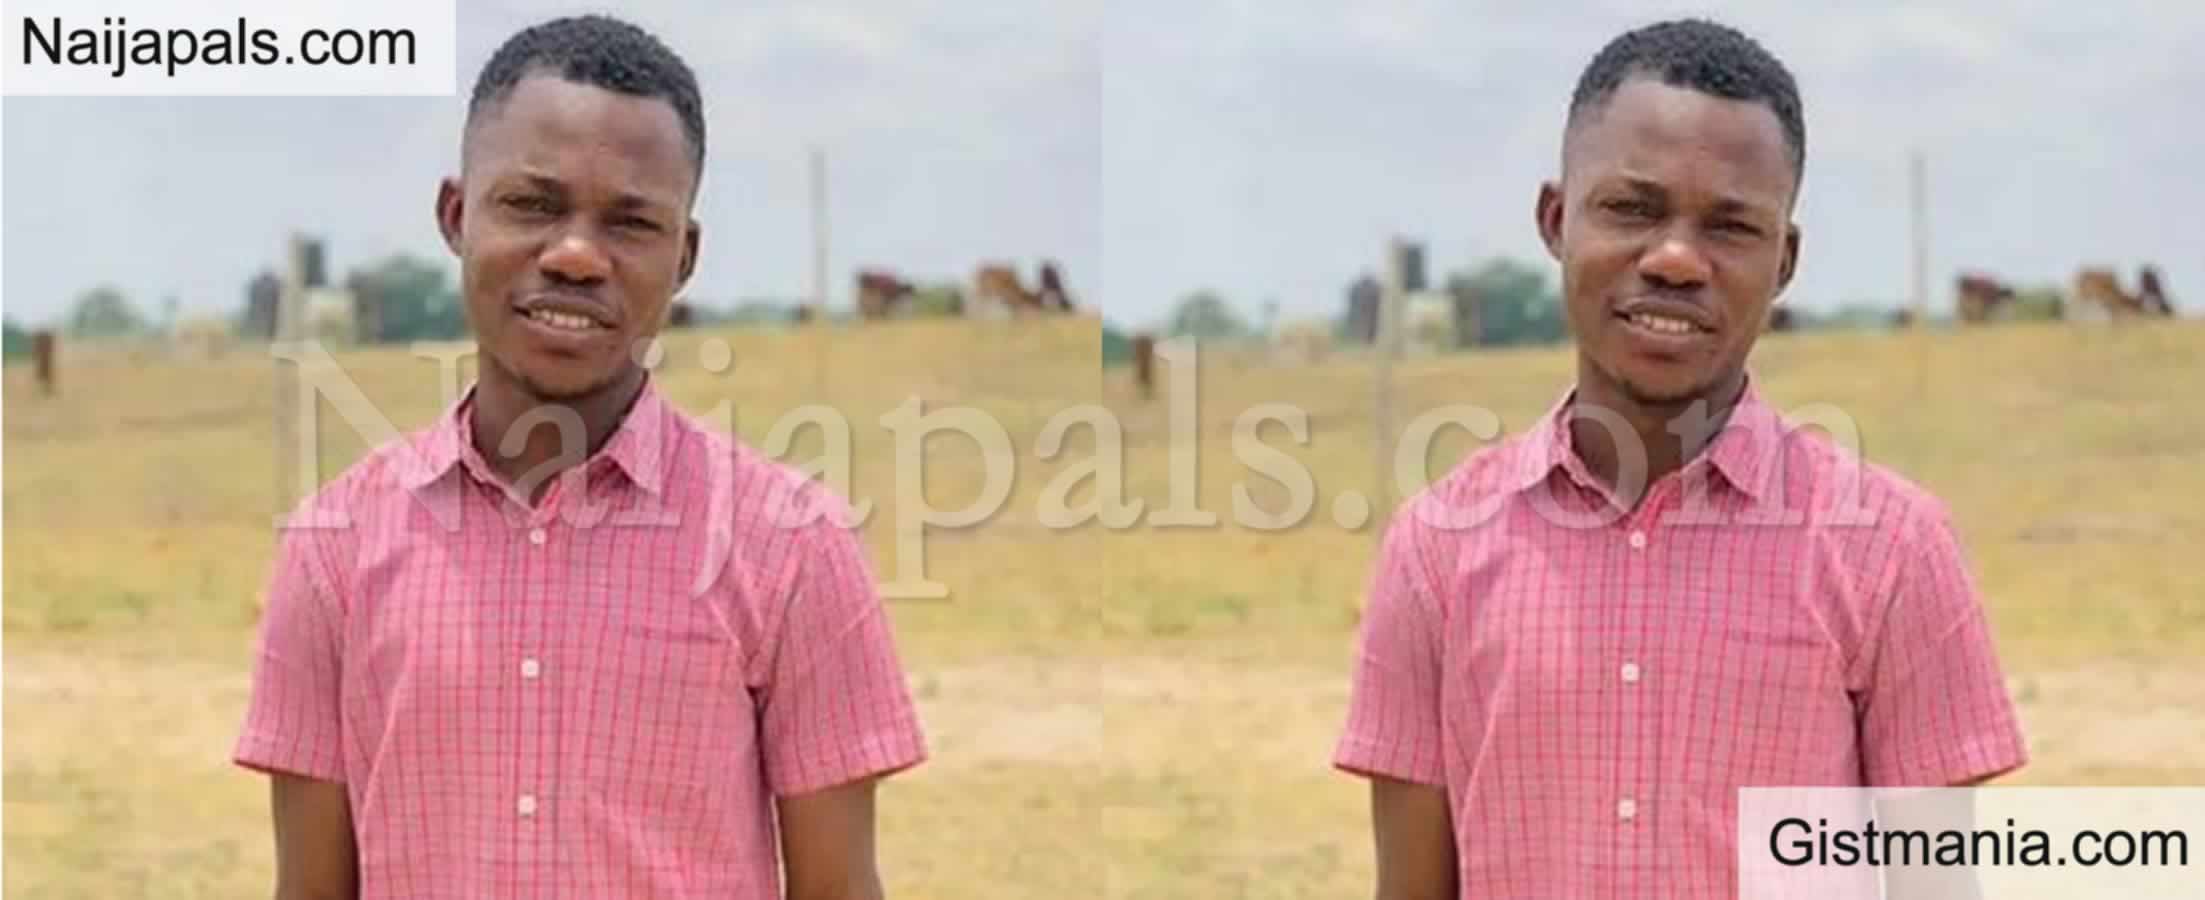 <img alt='.' class='lazyload' data-src='https://img.gistmania.com/emot/thumbs_up.gif' /> <b>Nigerians Donate N1.3M For Student Who Couldn’t Afford Flight Ticket After Securing Scholarship</b>